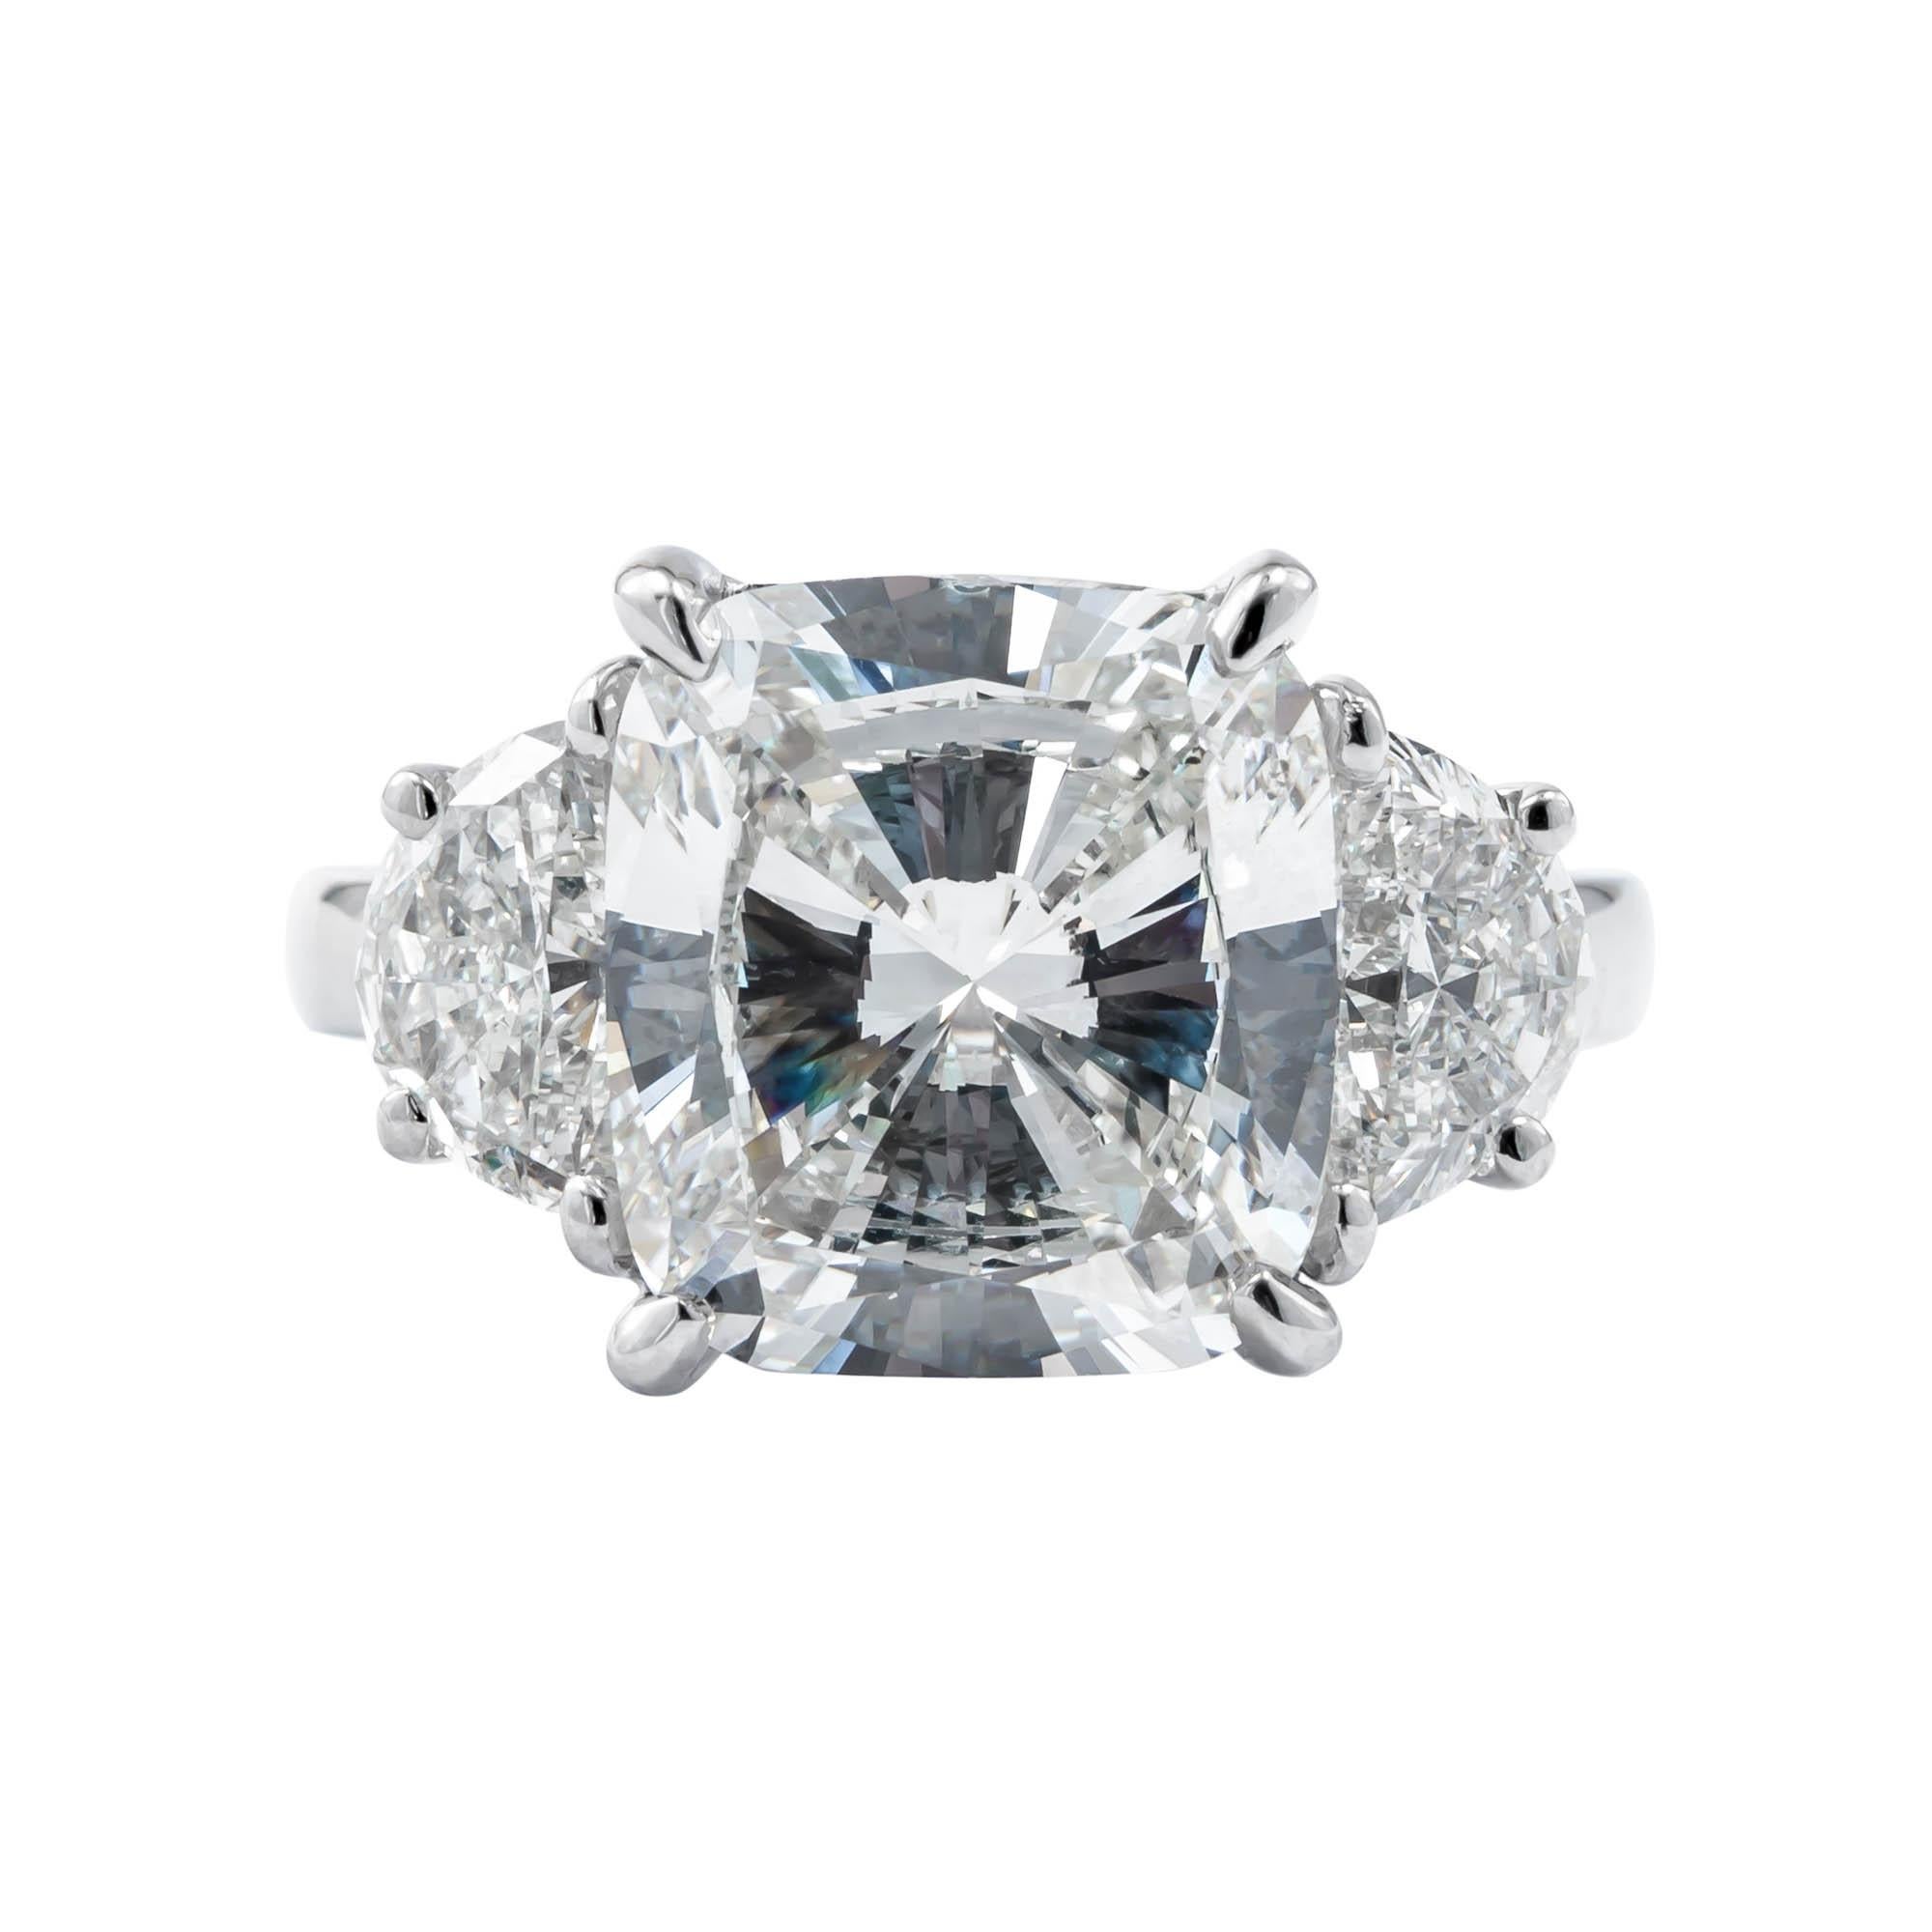 GIA Certified 5.01 Carat H/SI2 Three-Stone Diamond Engagement Ring For Sale